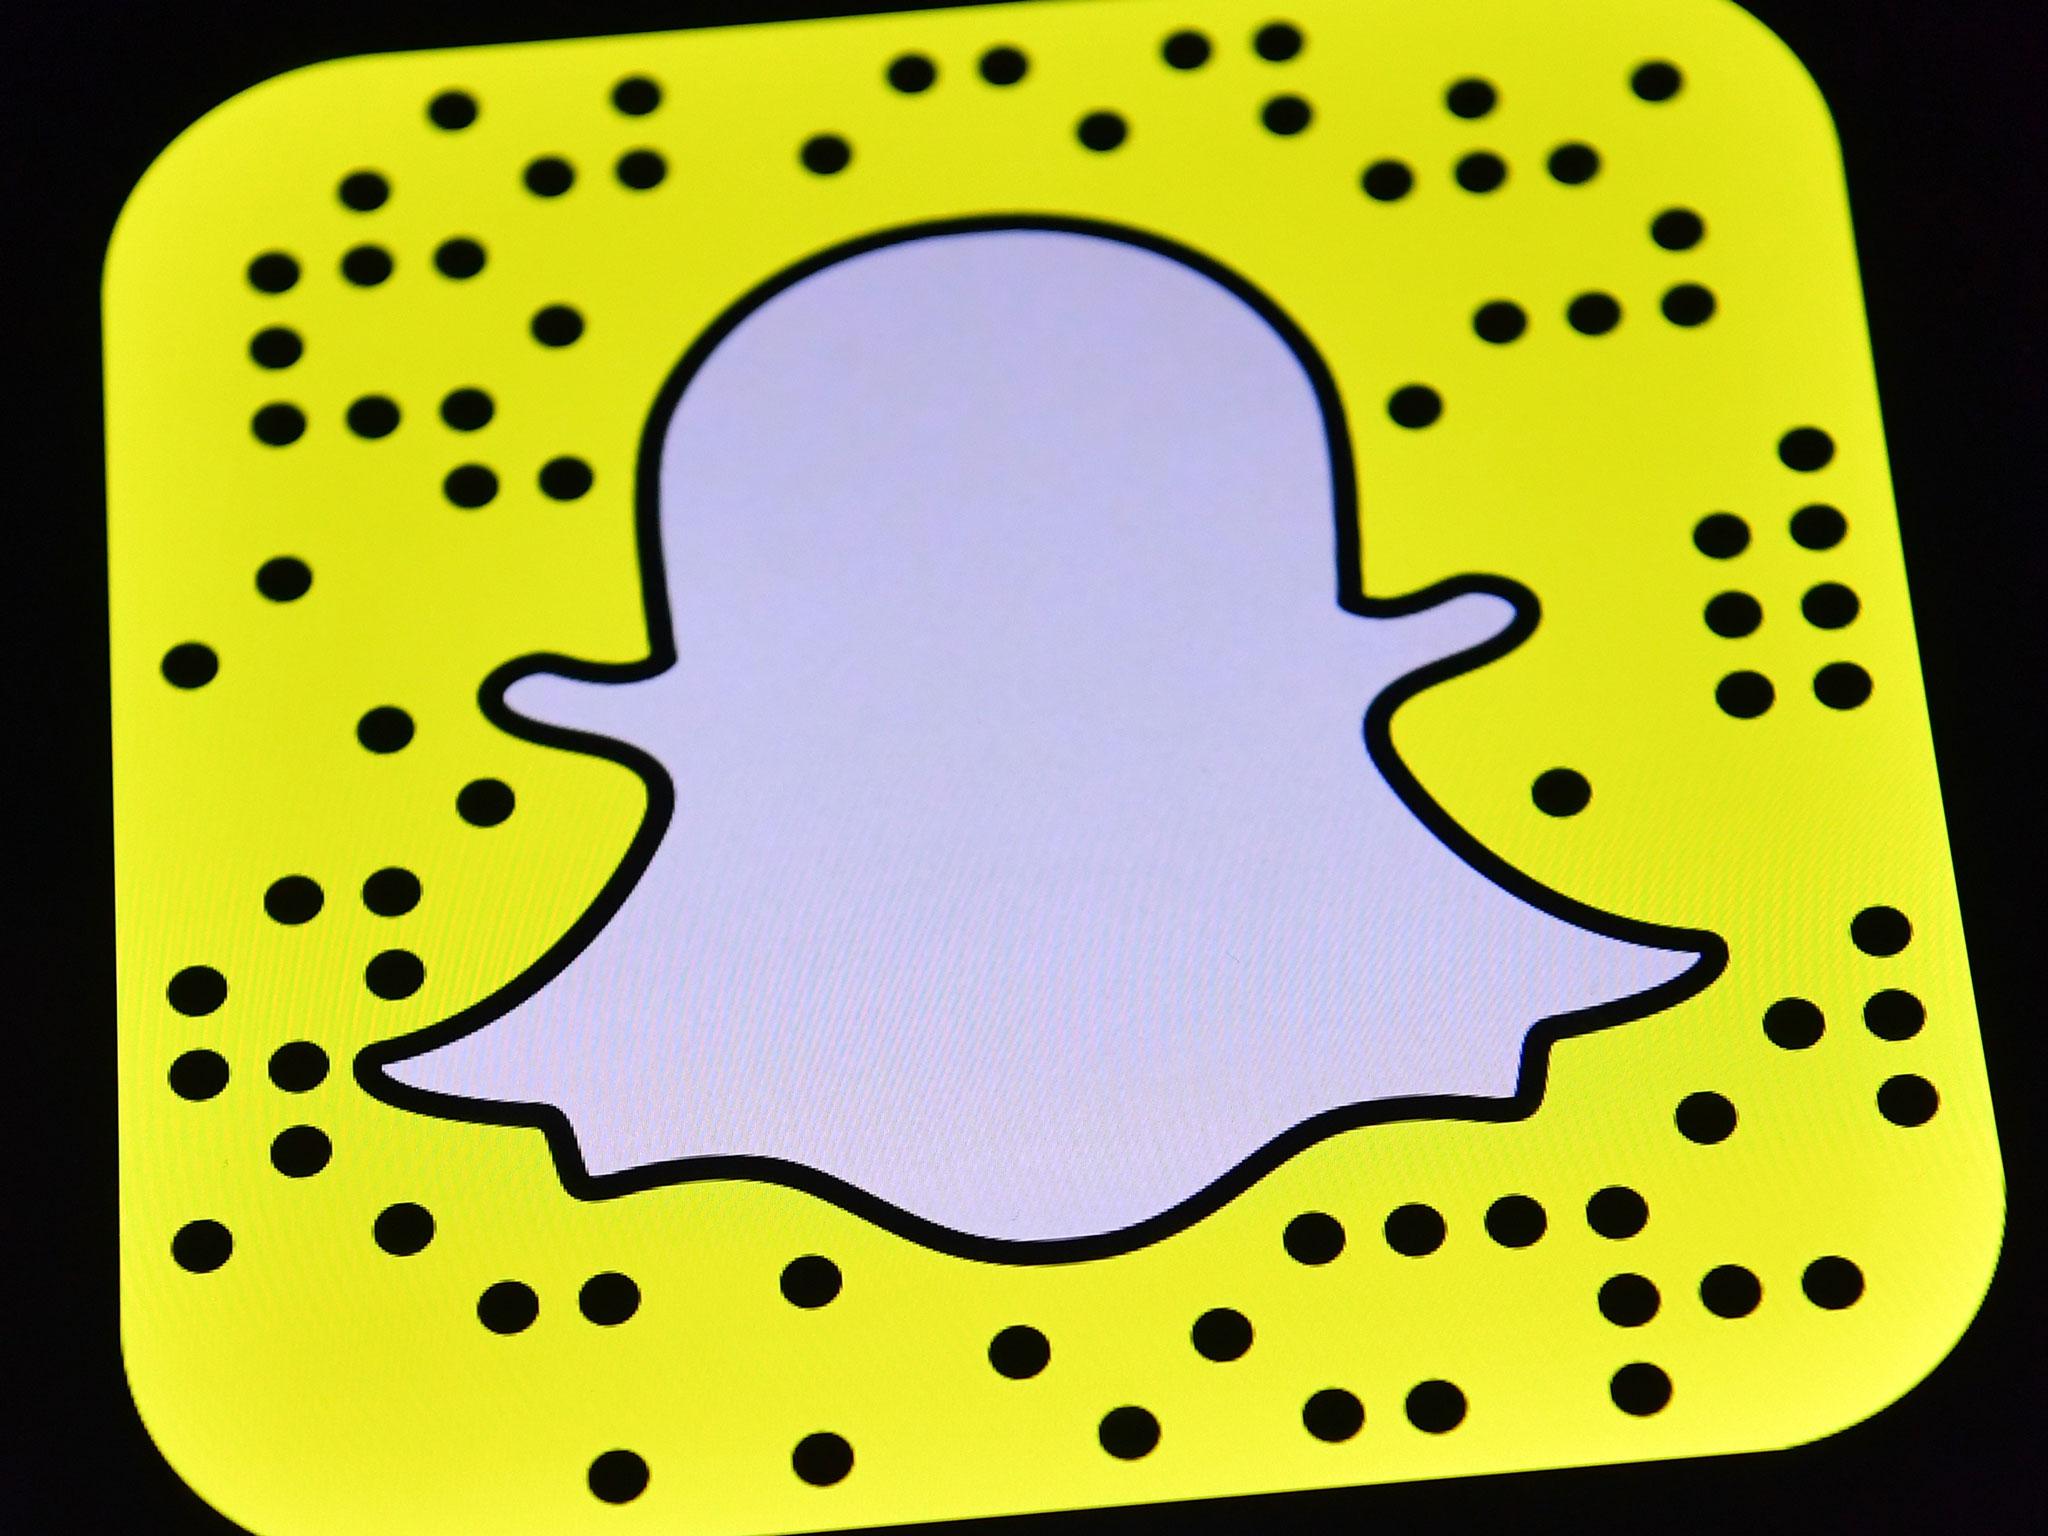 Zenly and Bitmoji, which chief executive Evan Spiegel added through another acquisition last year, show that Snap is willing to purchase tools to broaden the application’s appeal